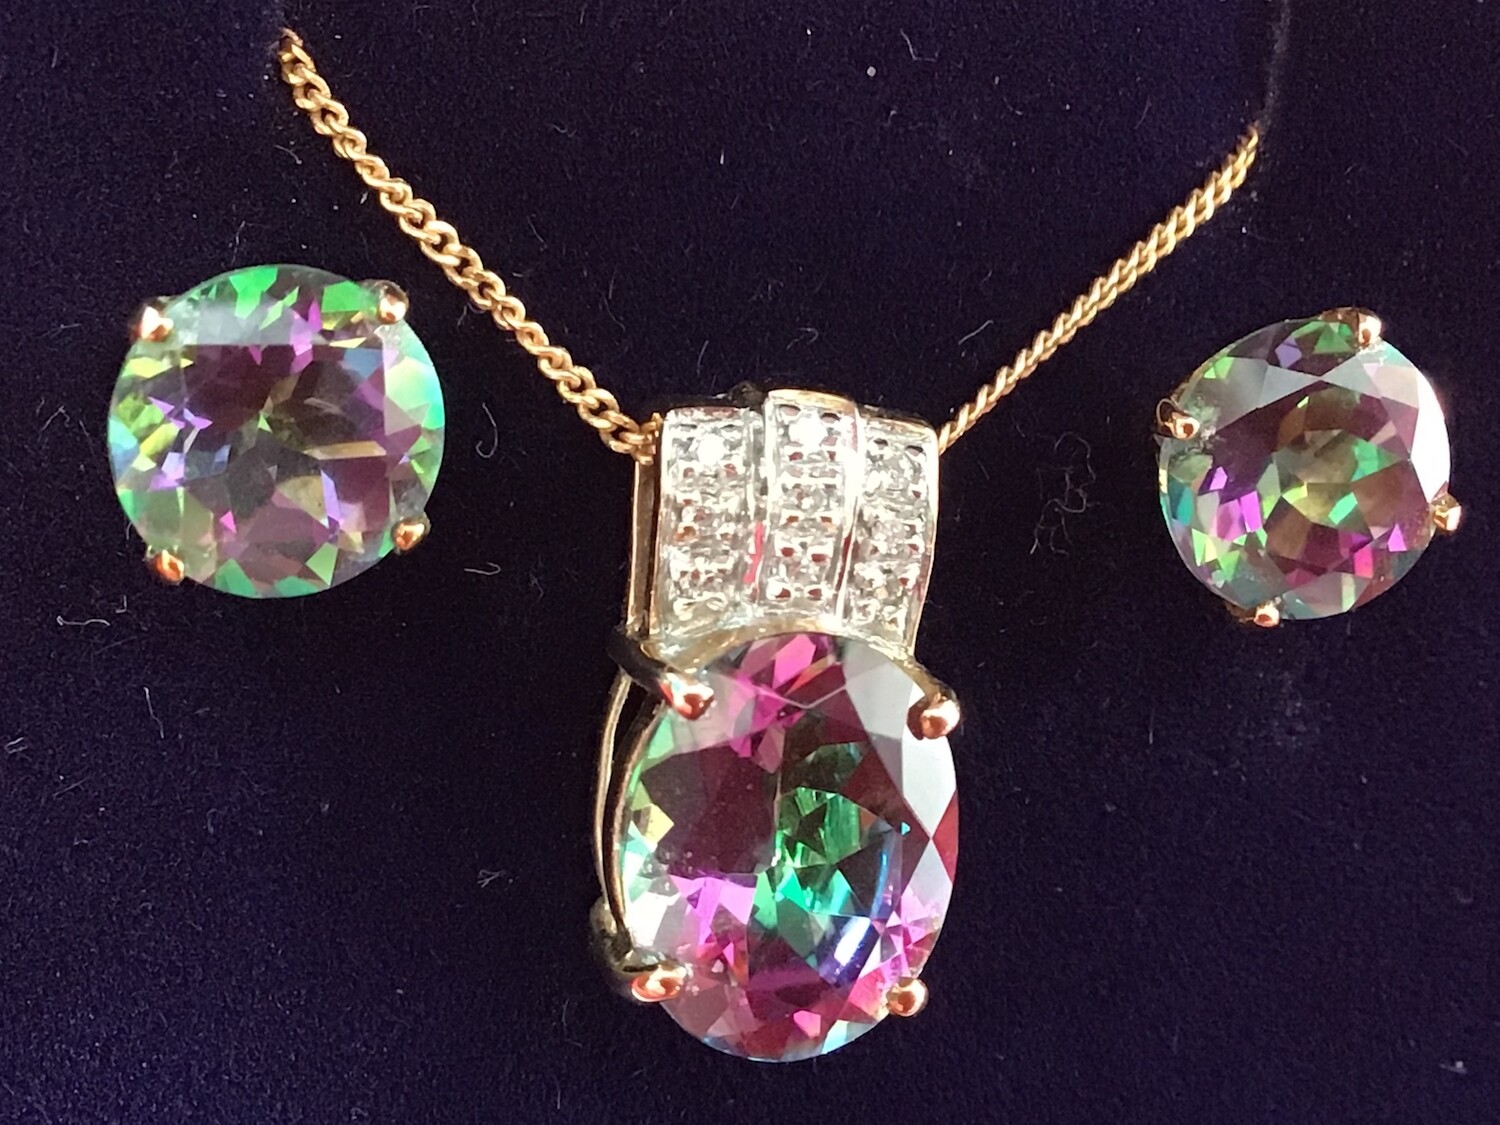 9k Gold Mystic Topaz & Diamond Necklace and earring set